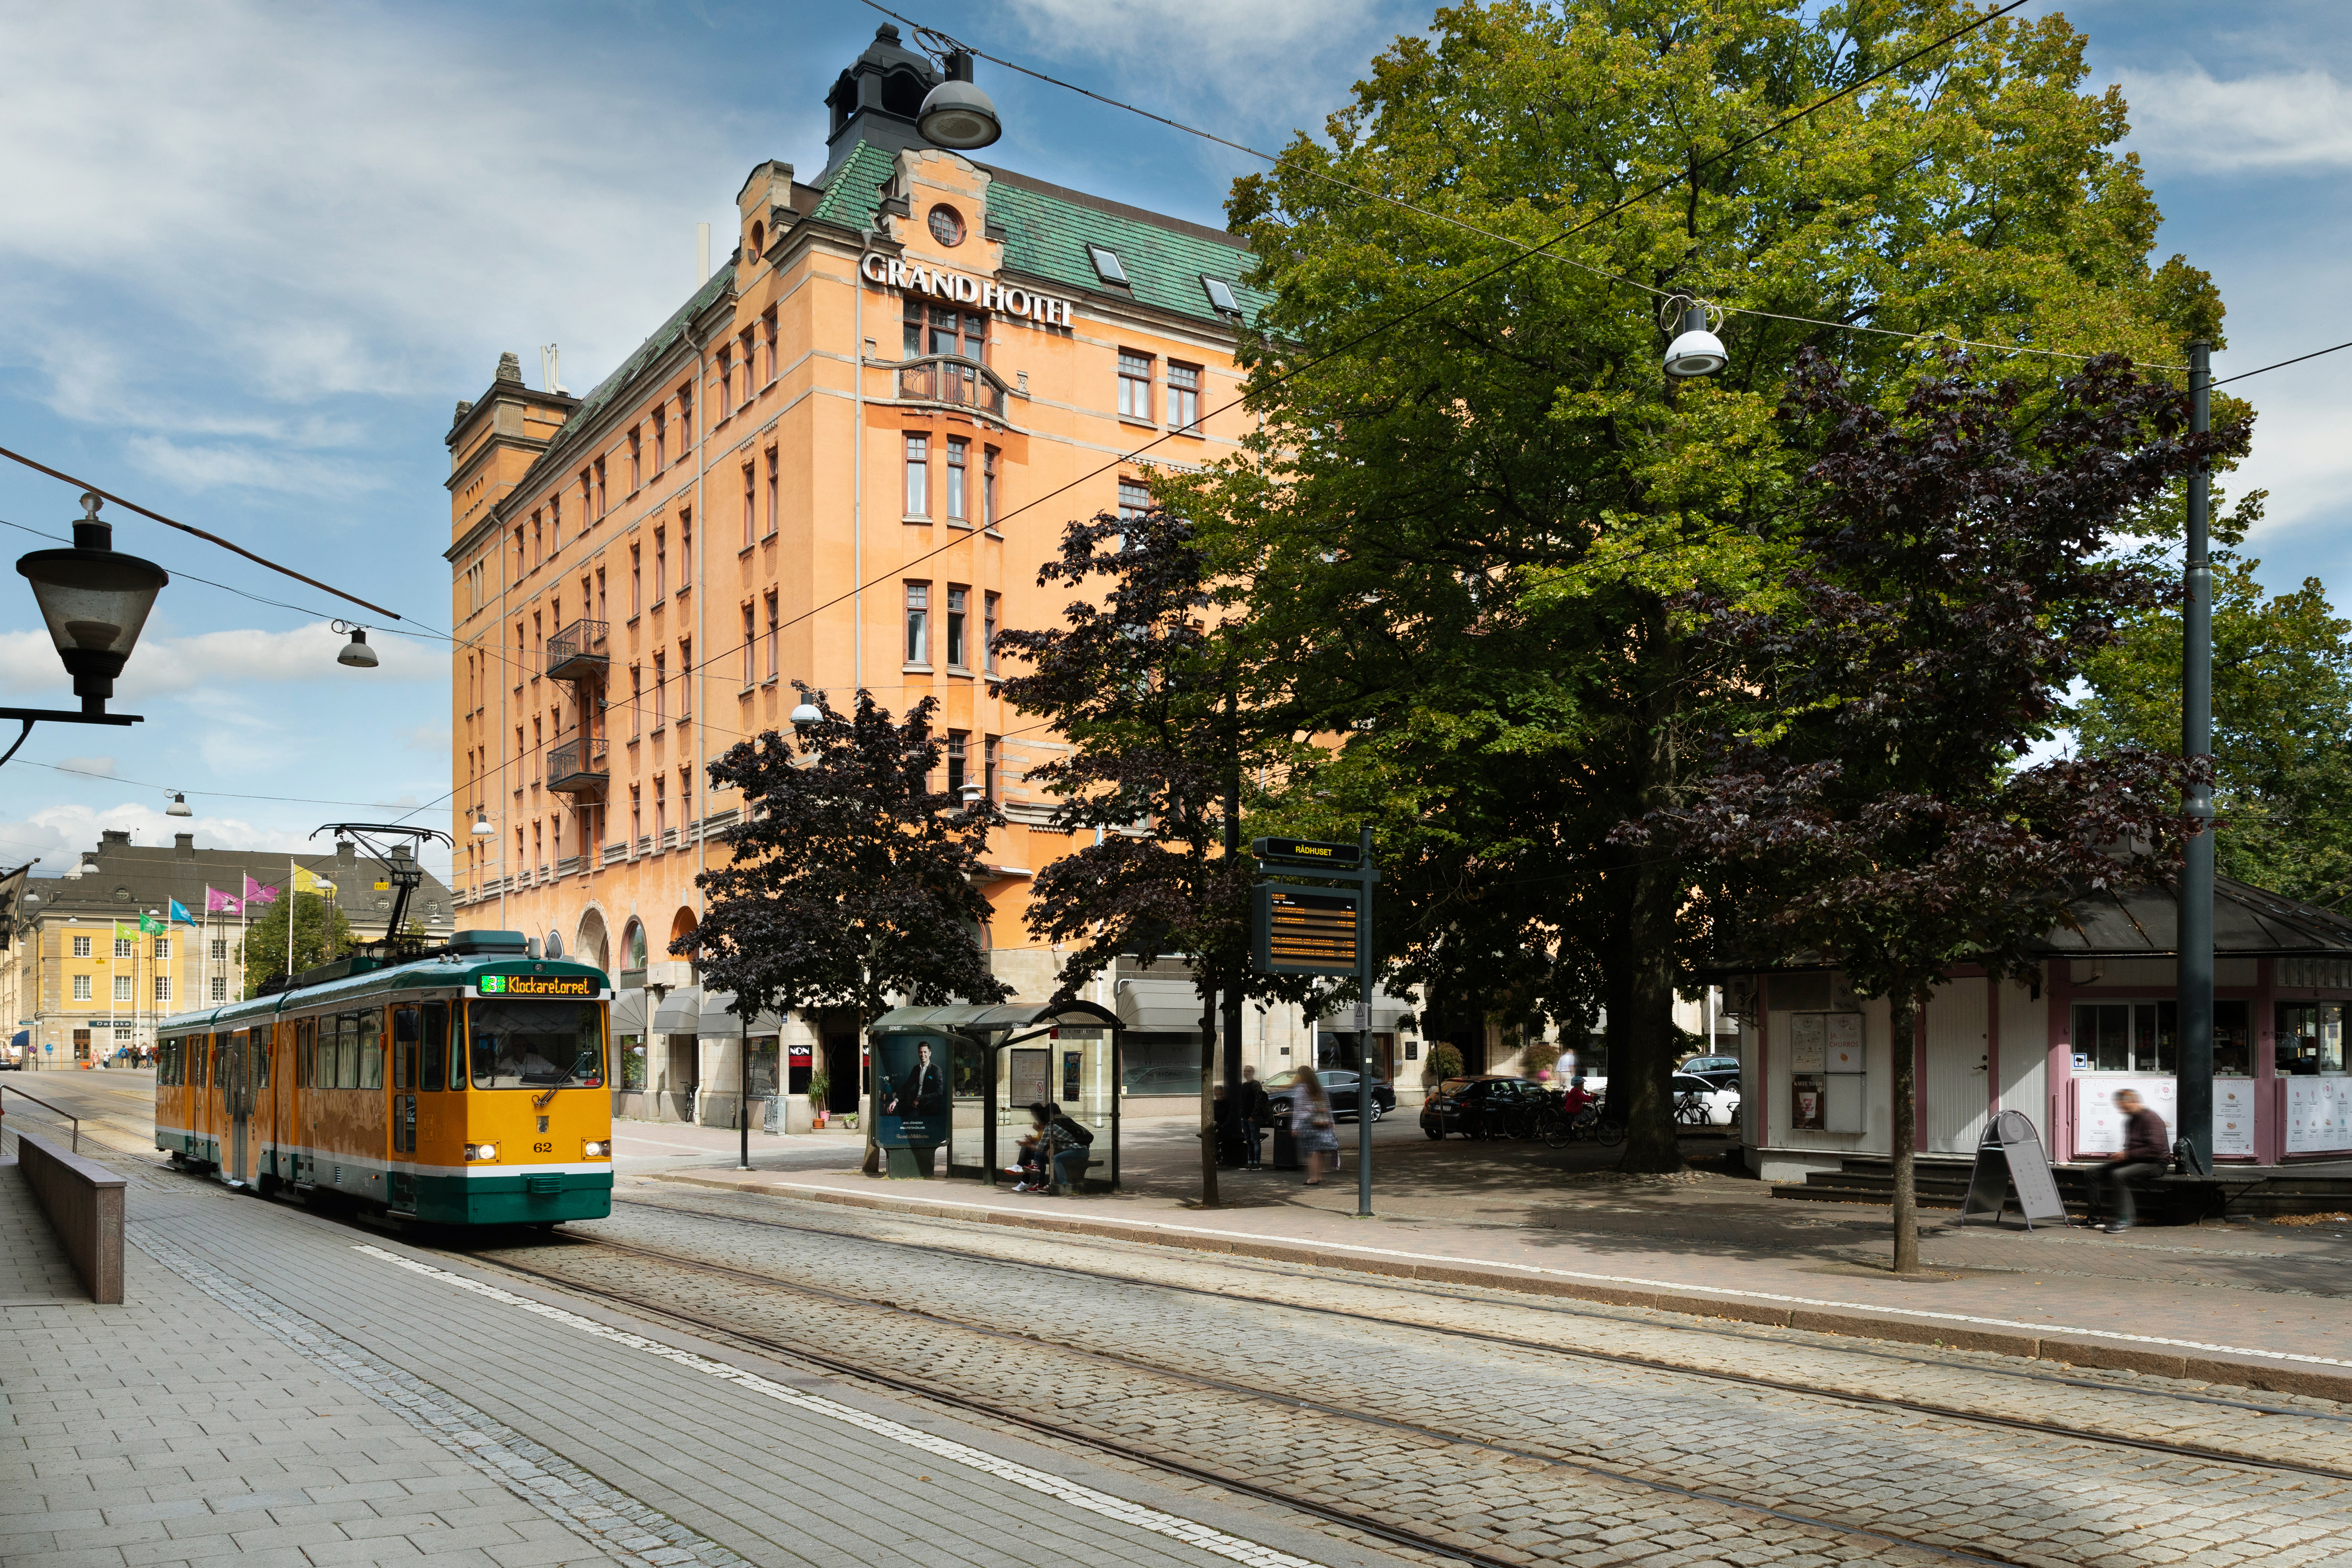 The orange facade of the Elite Grand Hotel in Norrköping with trees and a tram in front